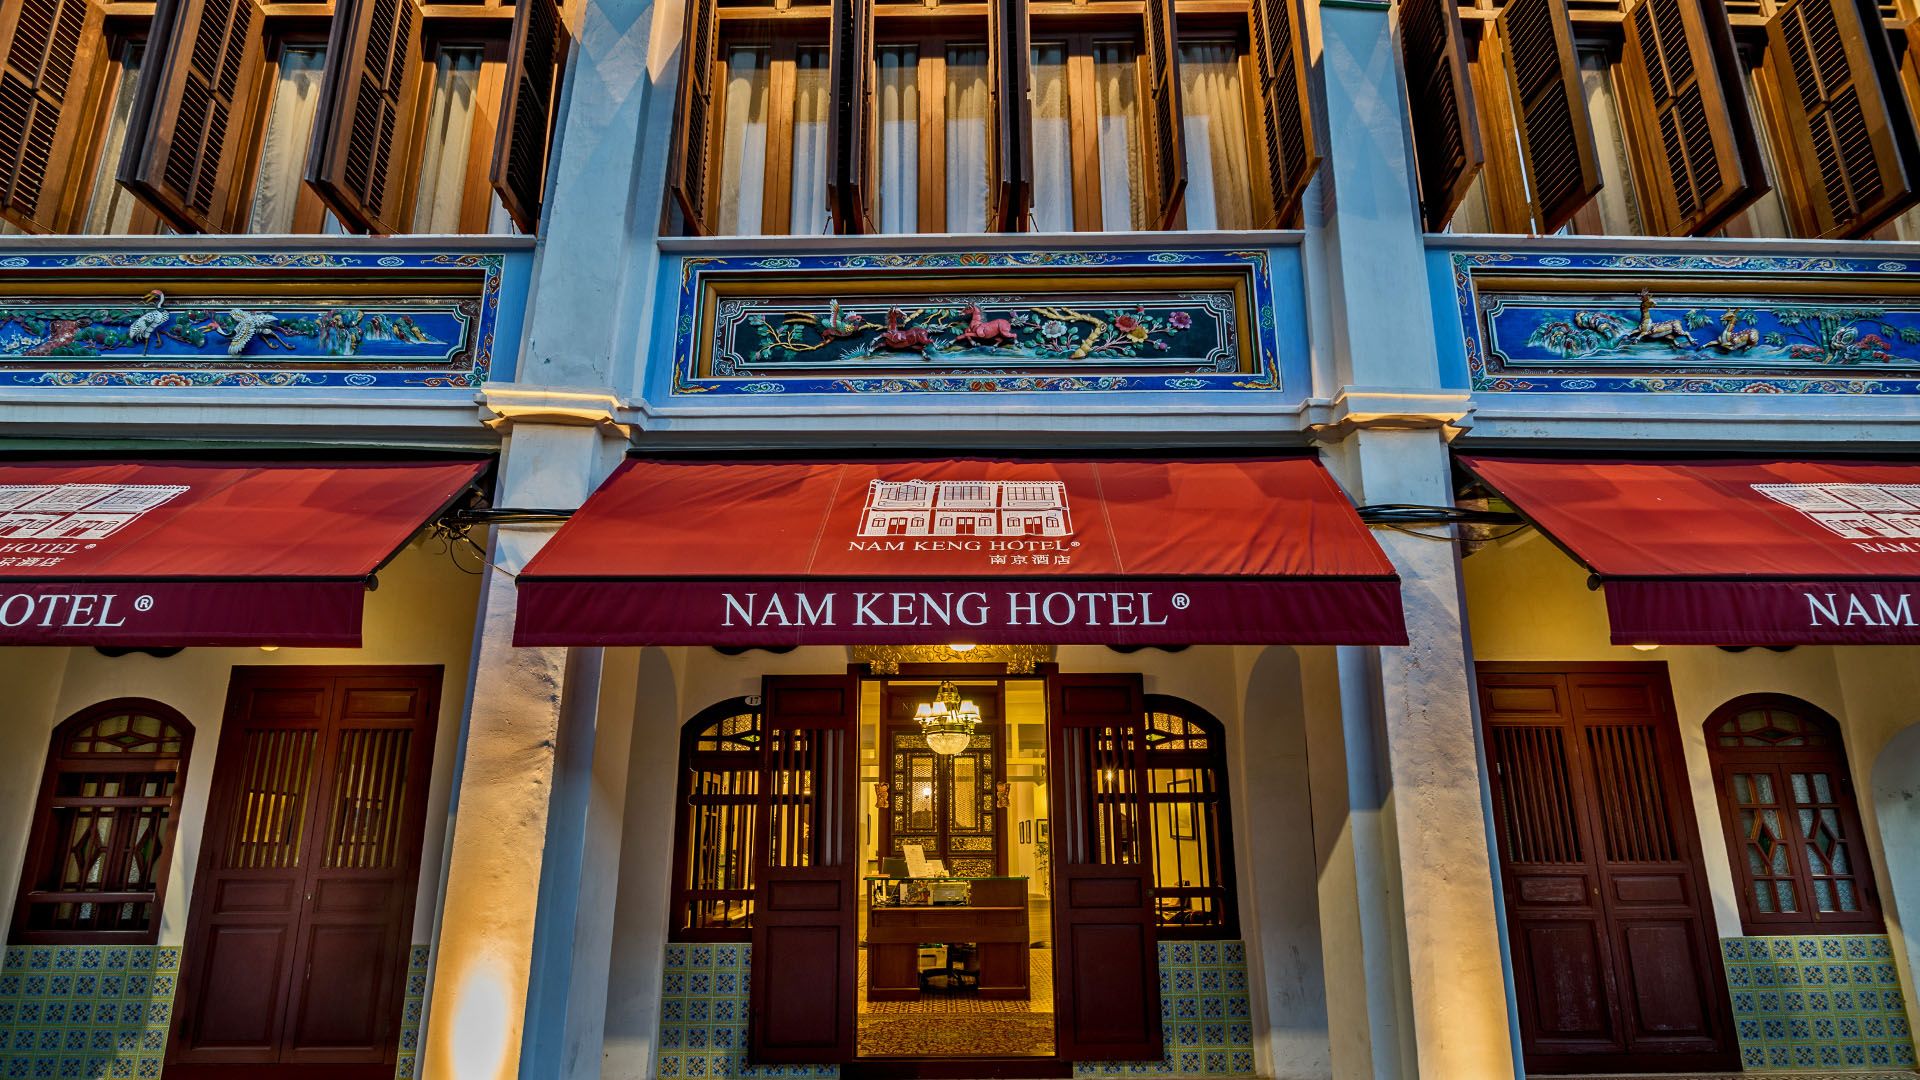 Nam Keng Hotel in City of George Town, Penang, Malaysia